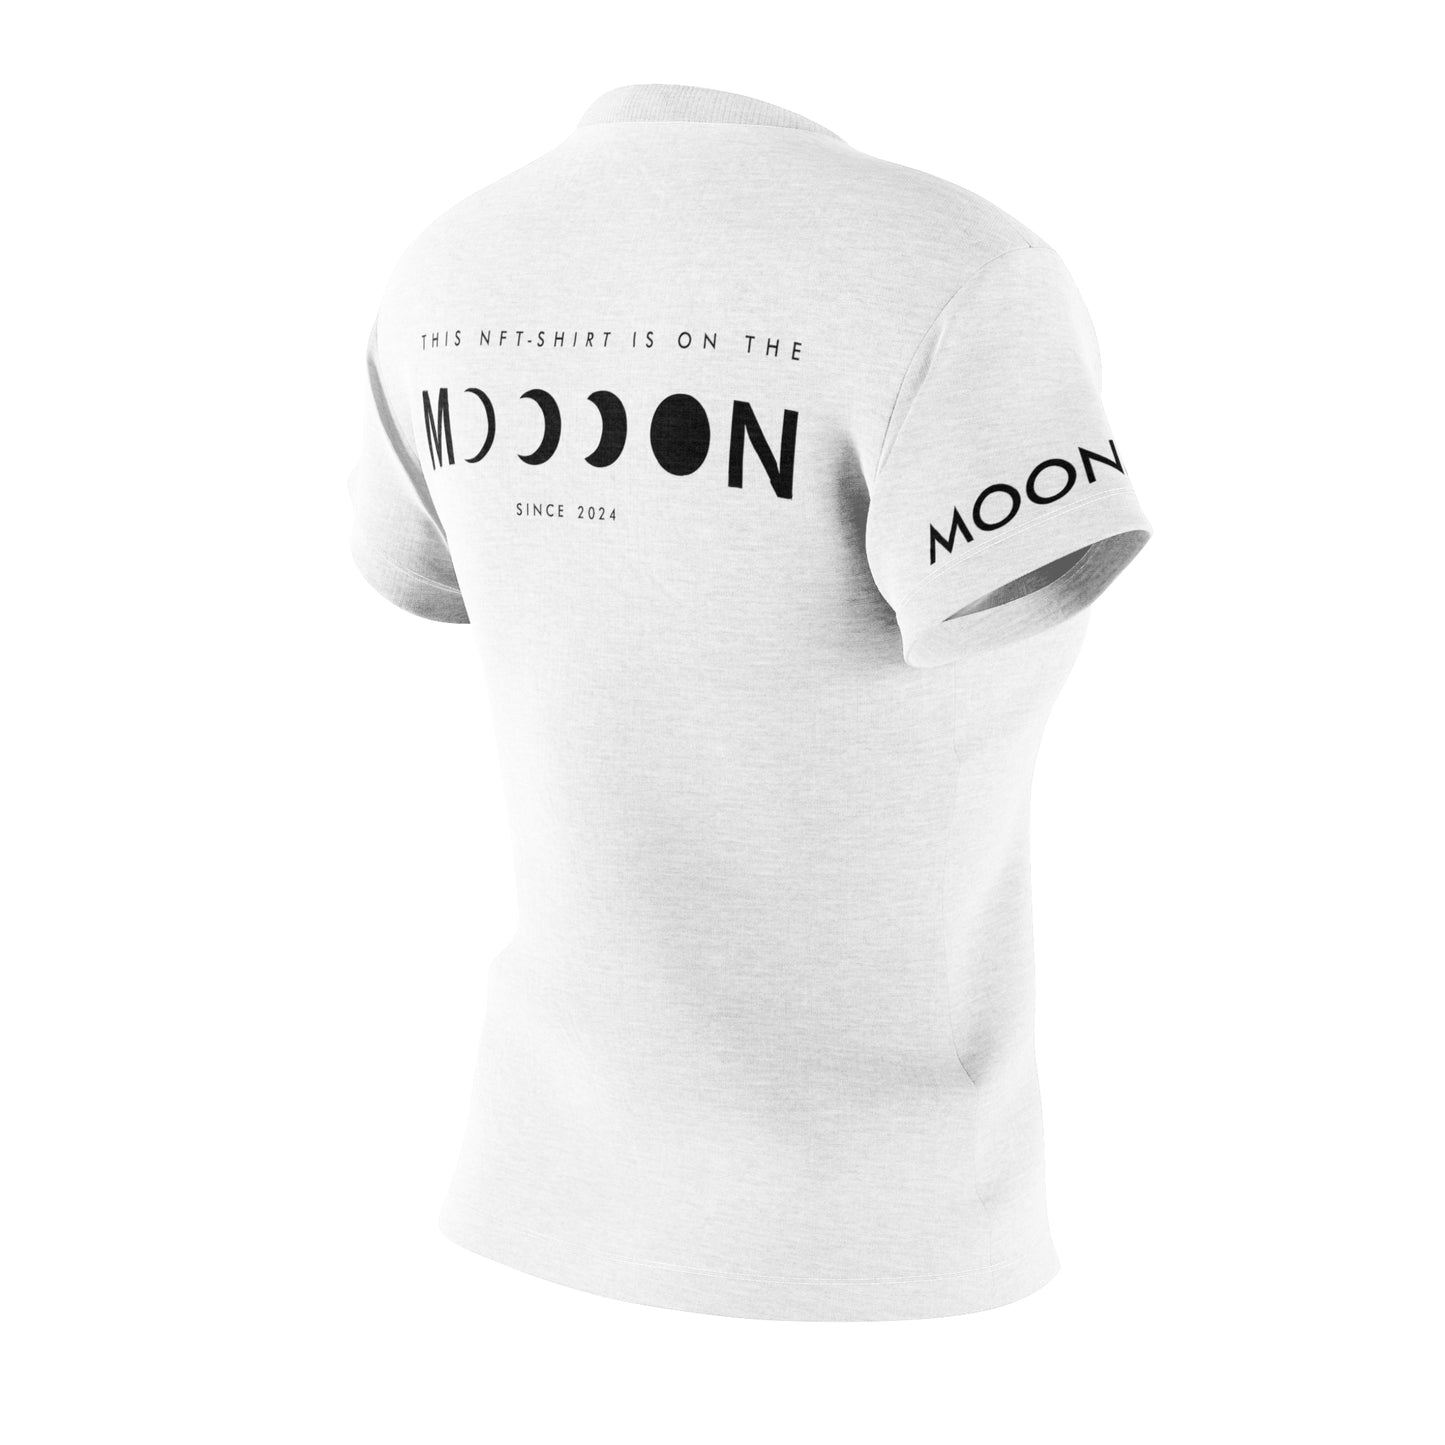 This NFT-Shirt is on the Moon WHITE Short Sleeve Sublimation Dye